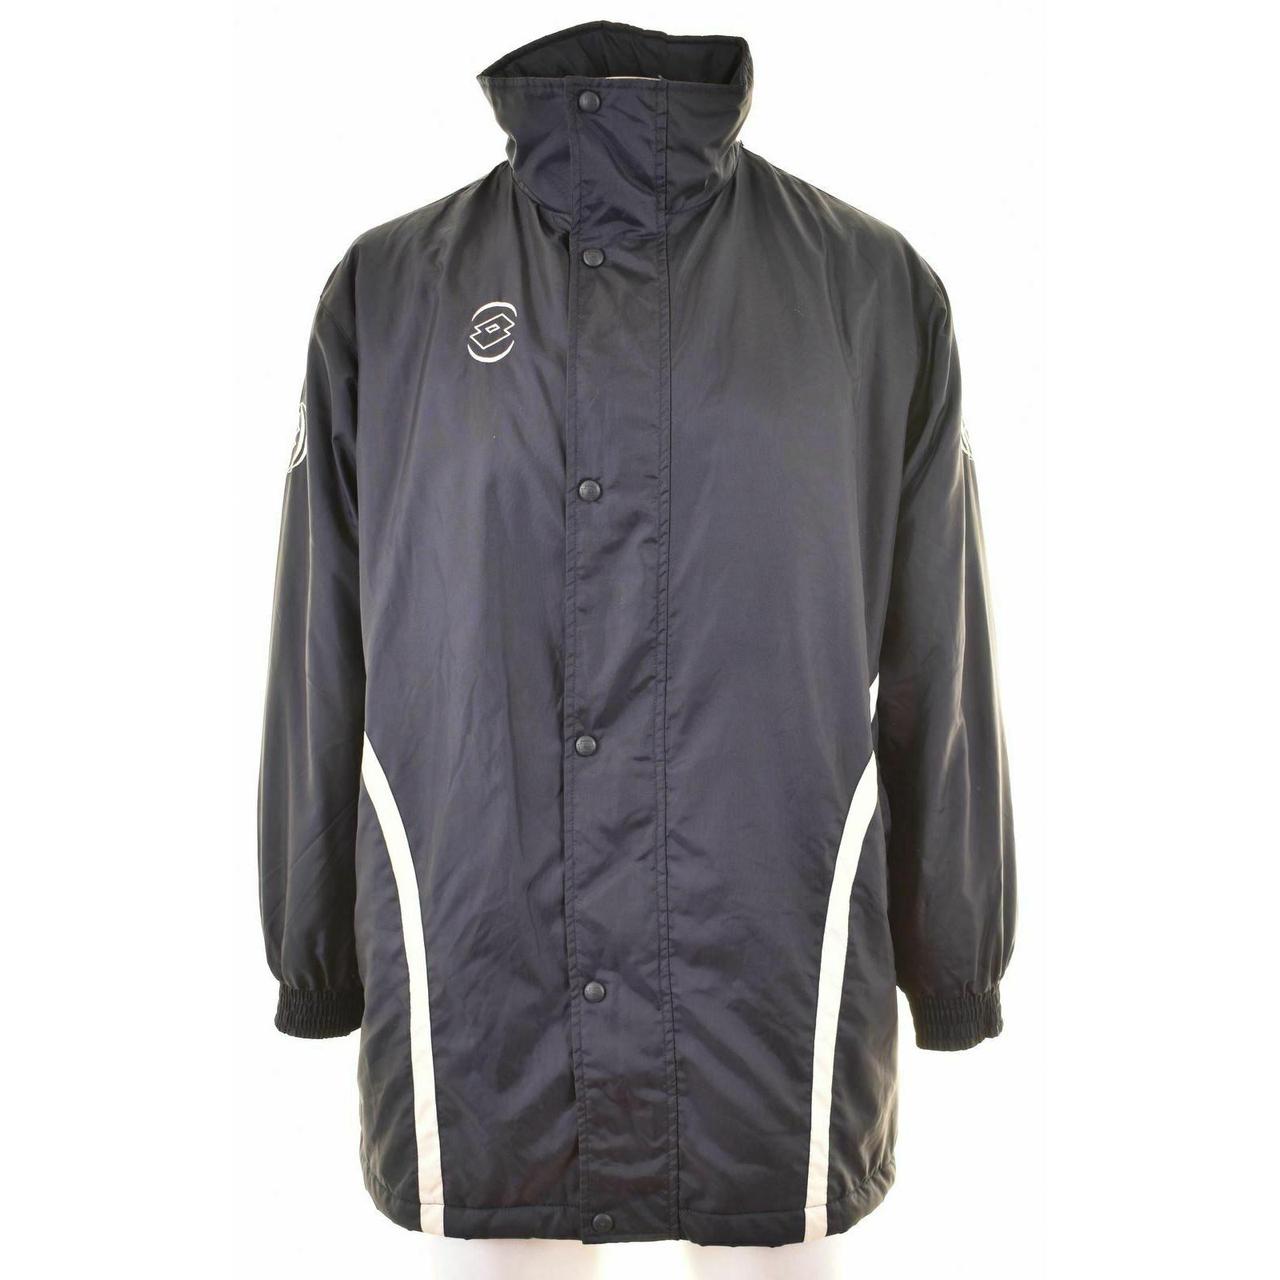 Lotto Men's Navy and Blue Jacket